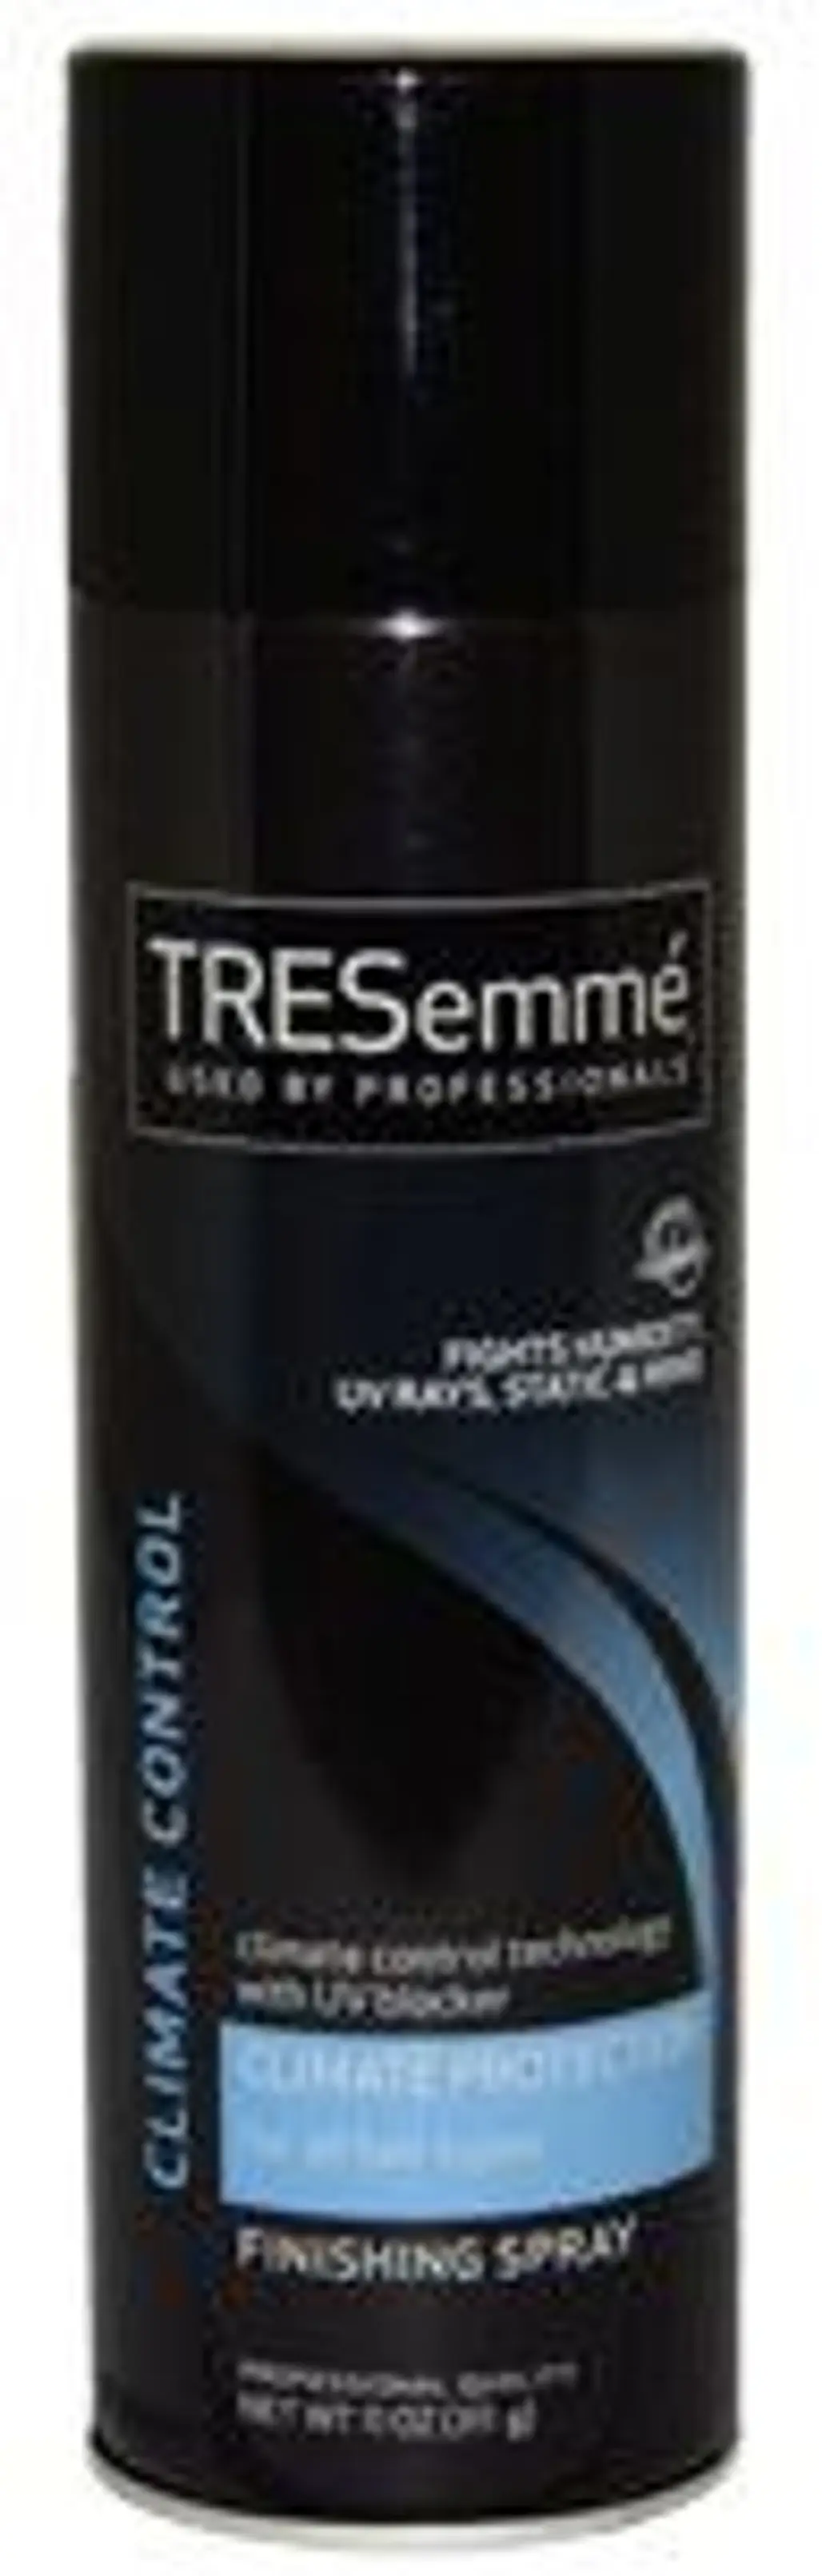 TRESemme Climate Control Finish Spray